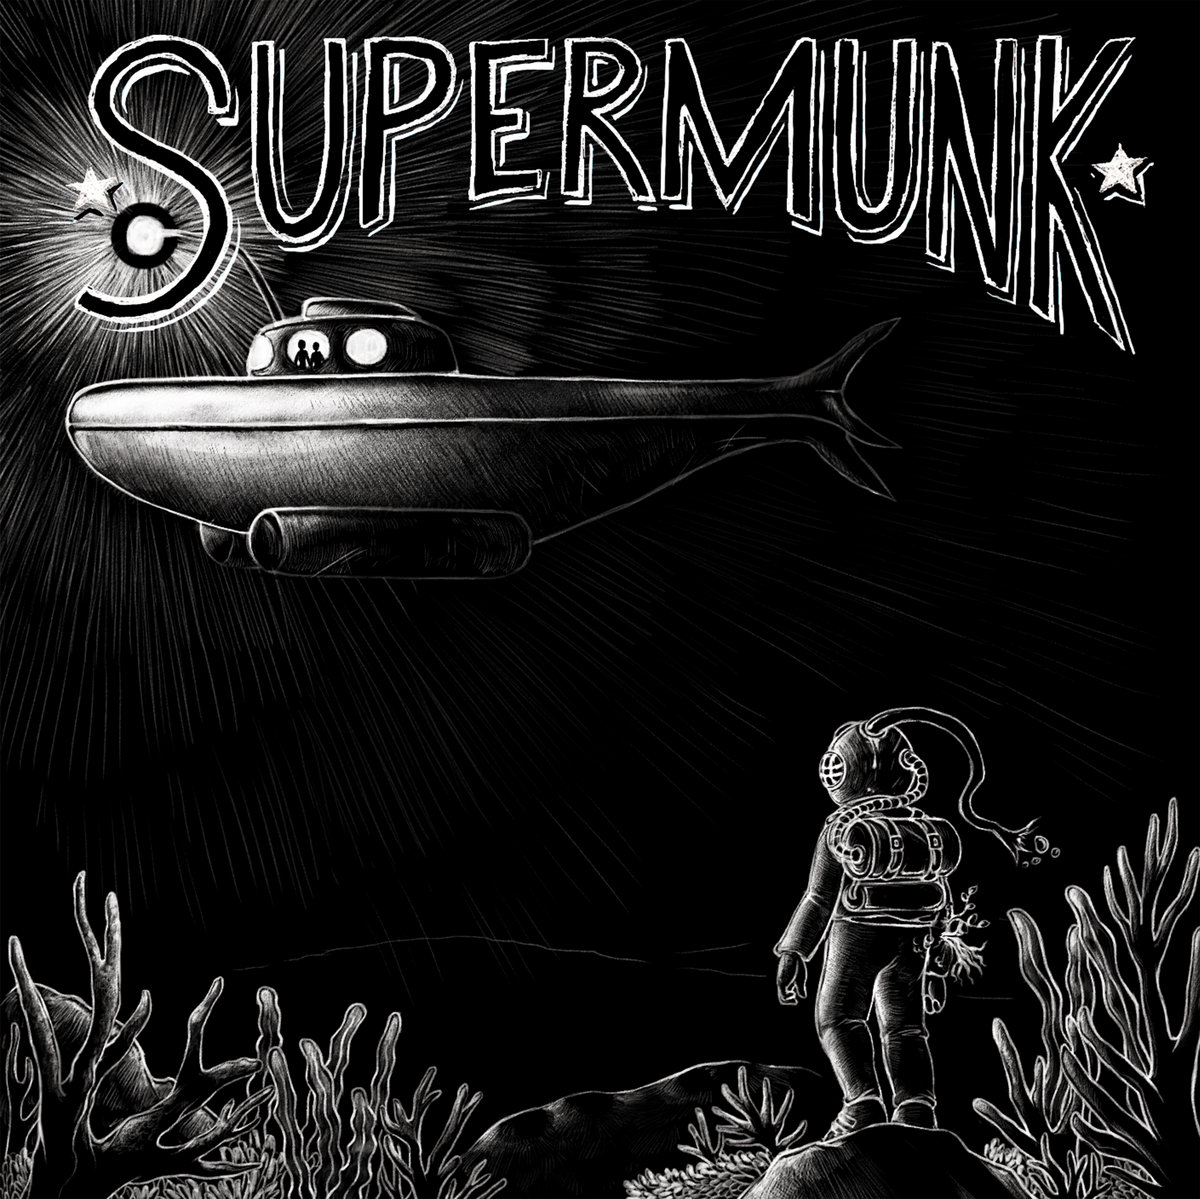 Supermunk, forest pooky